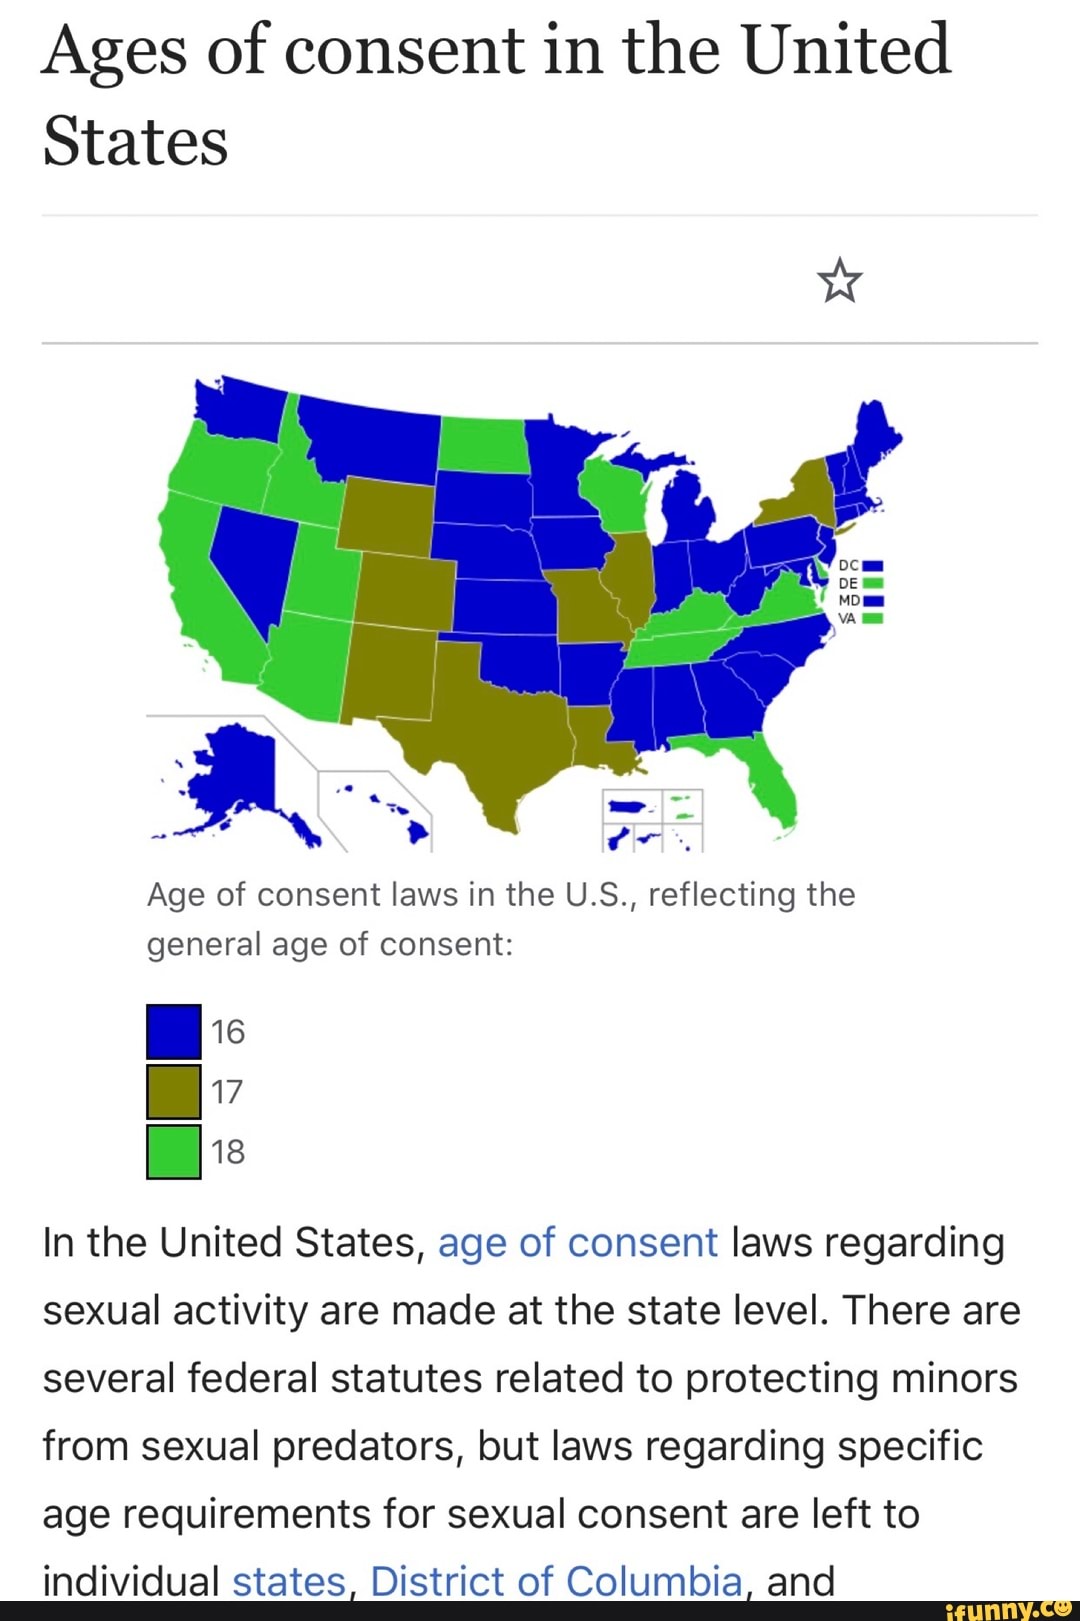 legal age of consent in new york state